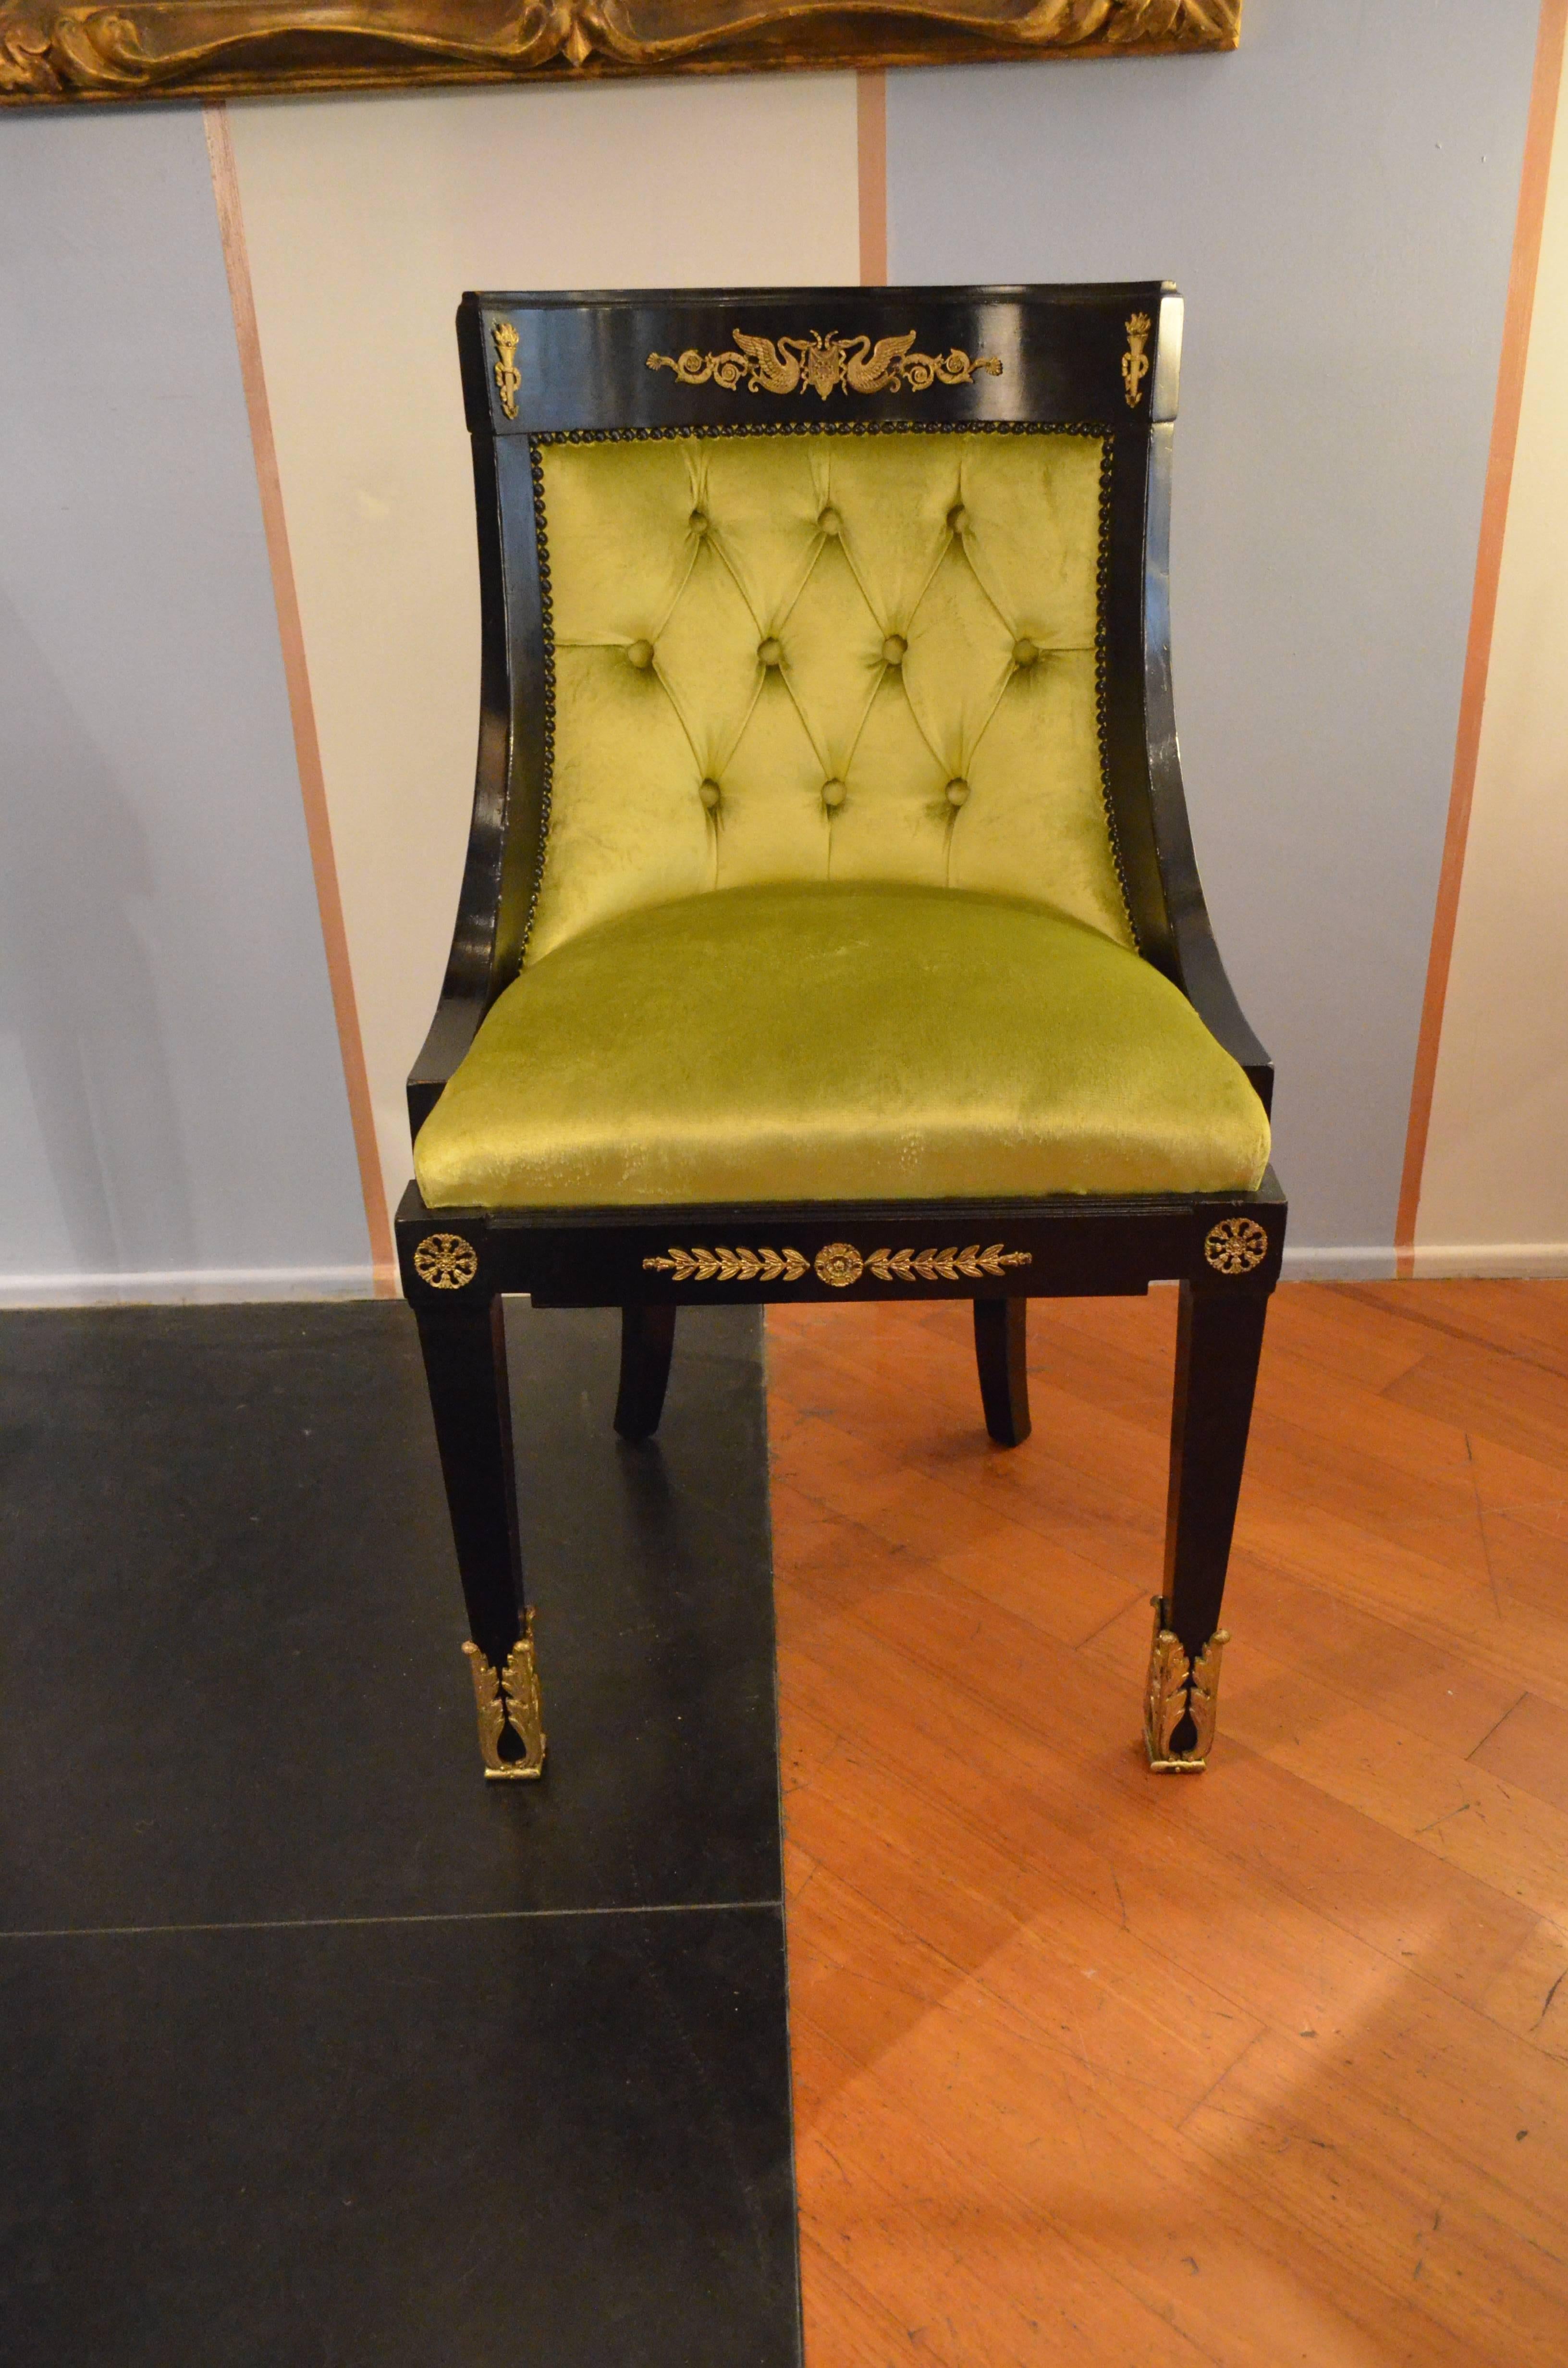 Late 19th Century 19th Century Napoleon III Black lacquered Wood Chairs Green Velvet Seats